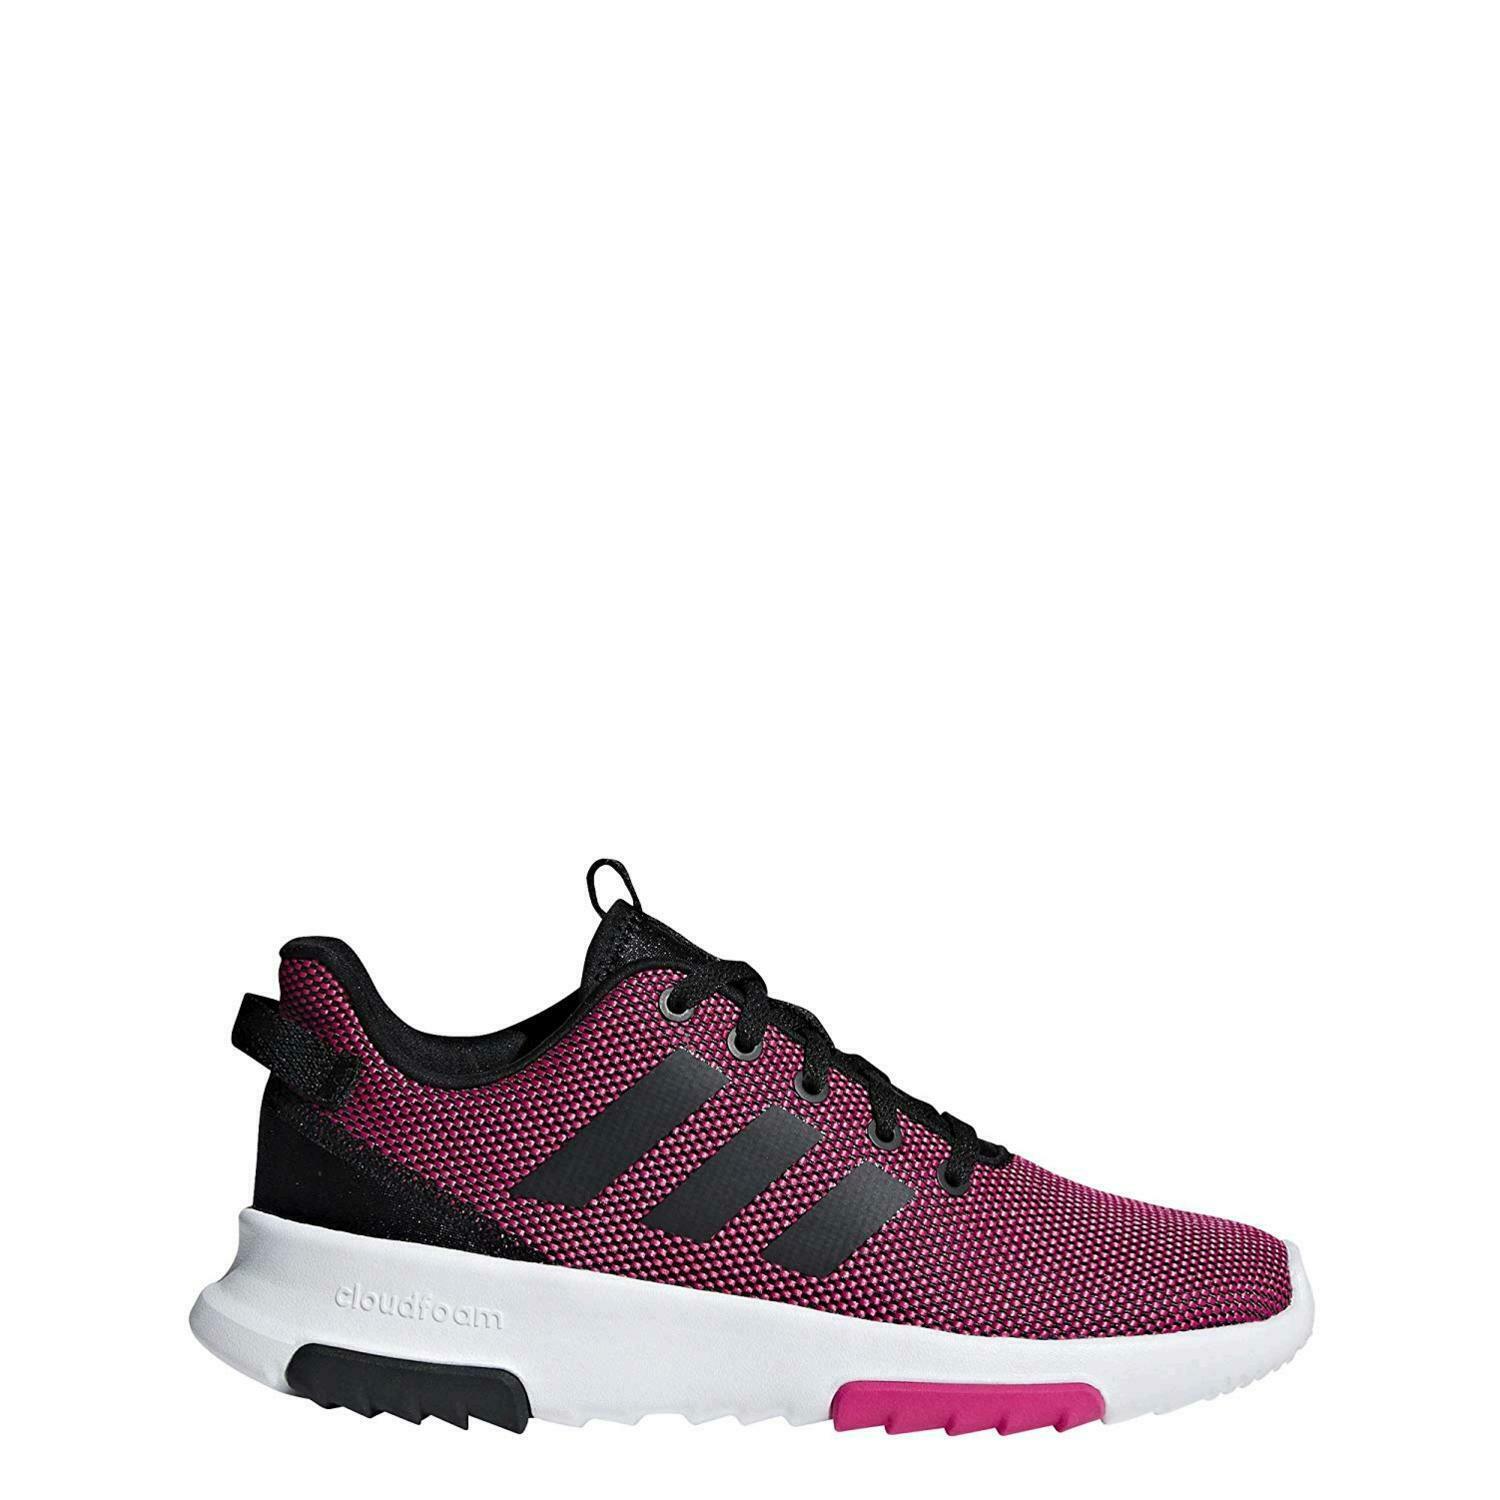 Kids Adidas Girls Racer tr k Low Top Lace Up Walking Shoes, Pink, Size 5.0 pvuc